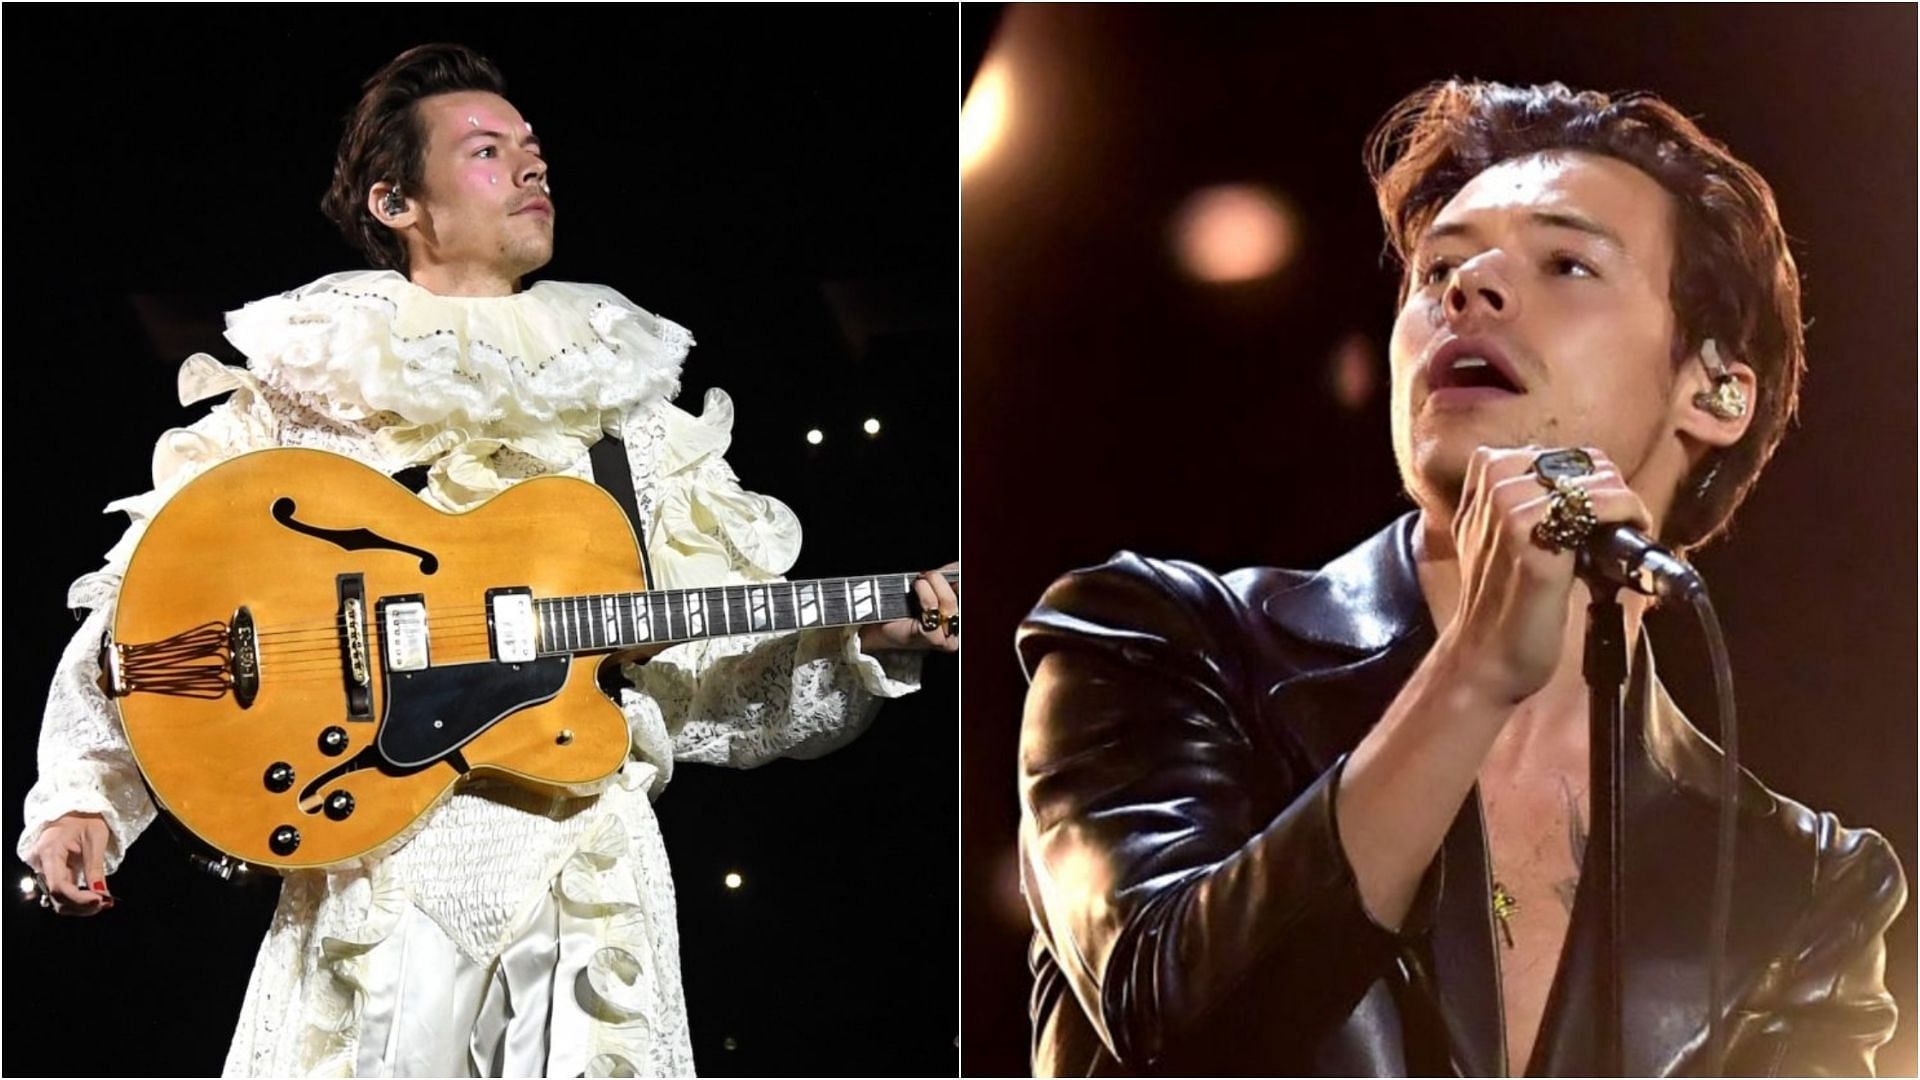 Harry Styles has announced new Love On tour dates for Australia and New Zealand. (Images via Kevin Mazur and Kevin Winter /Getty)